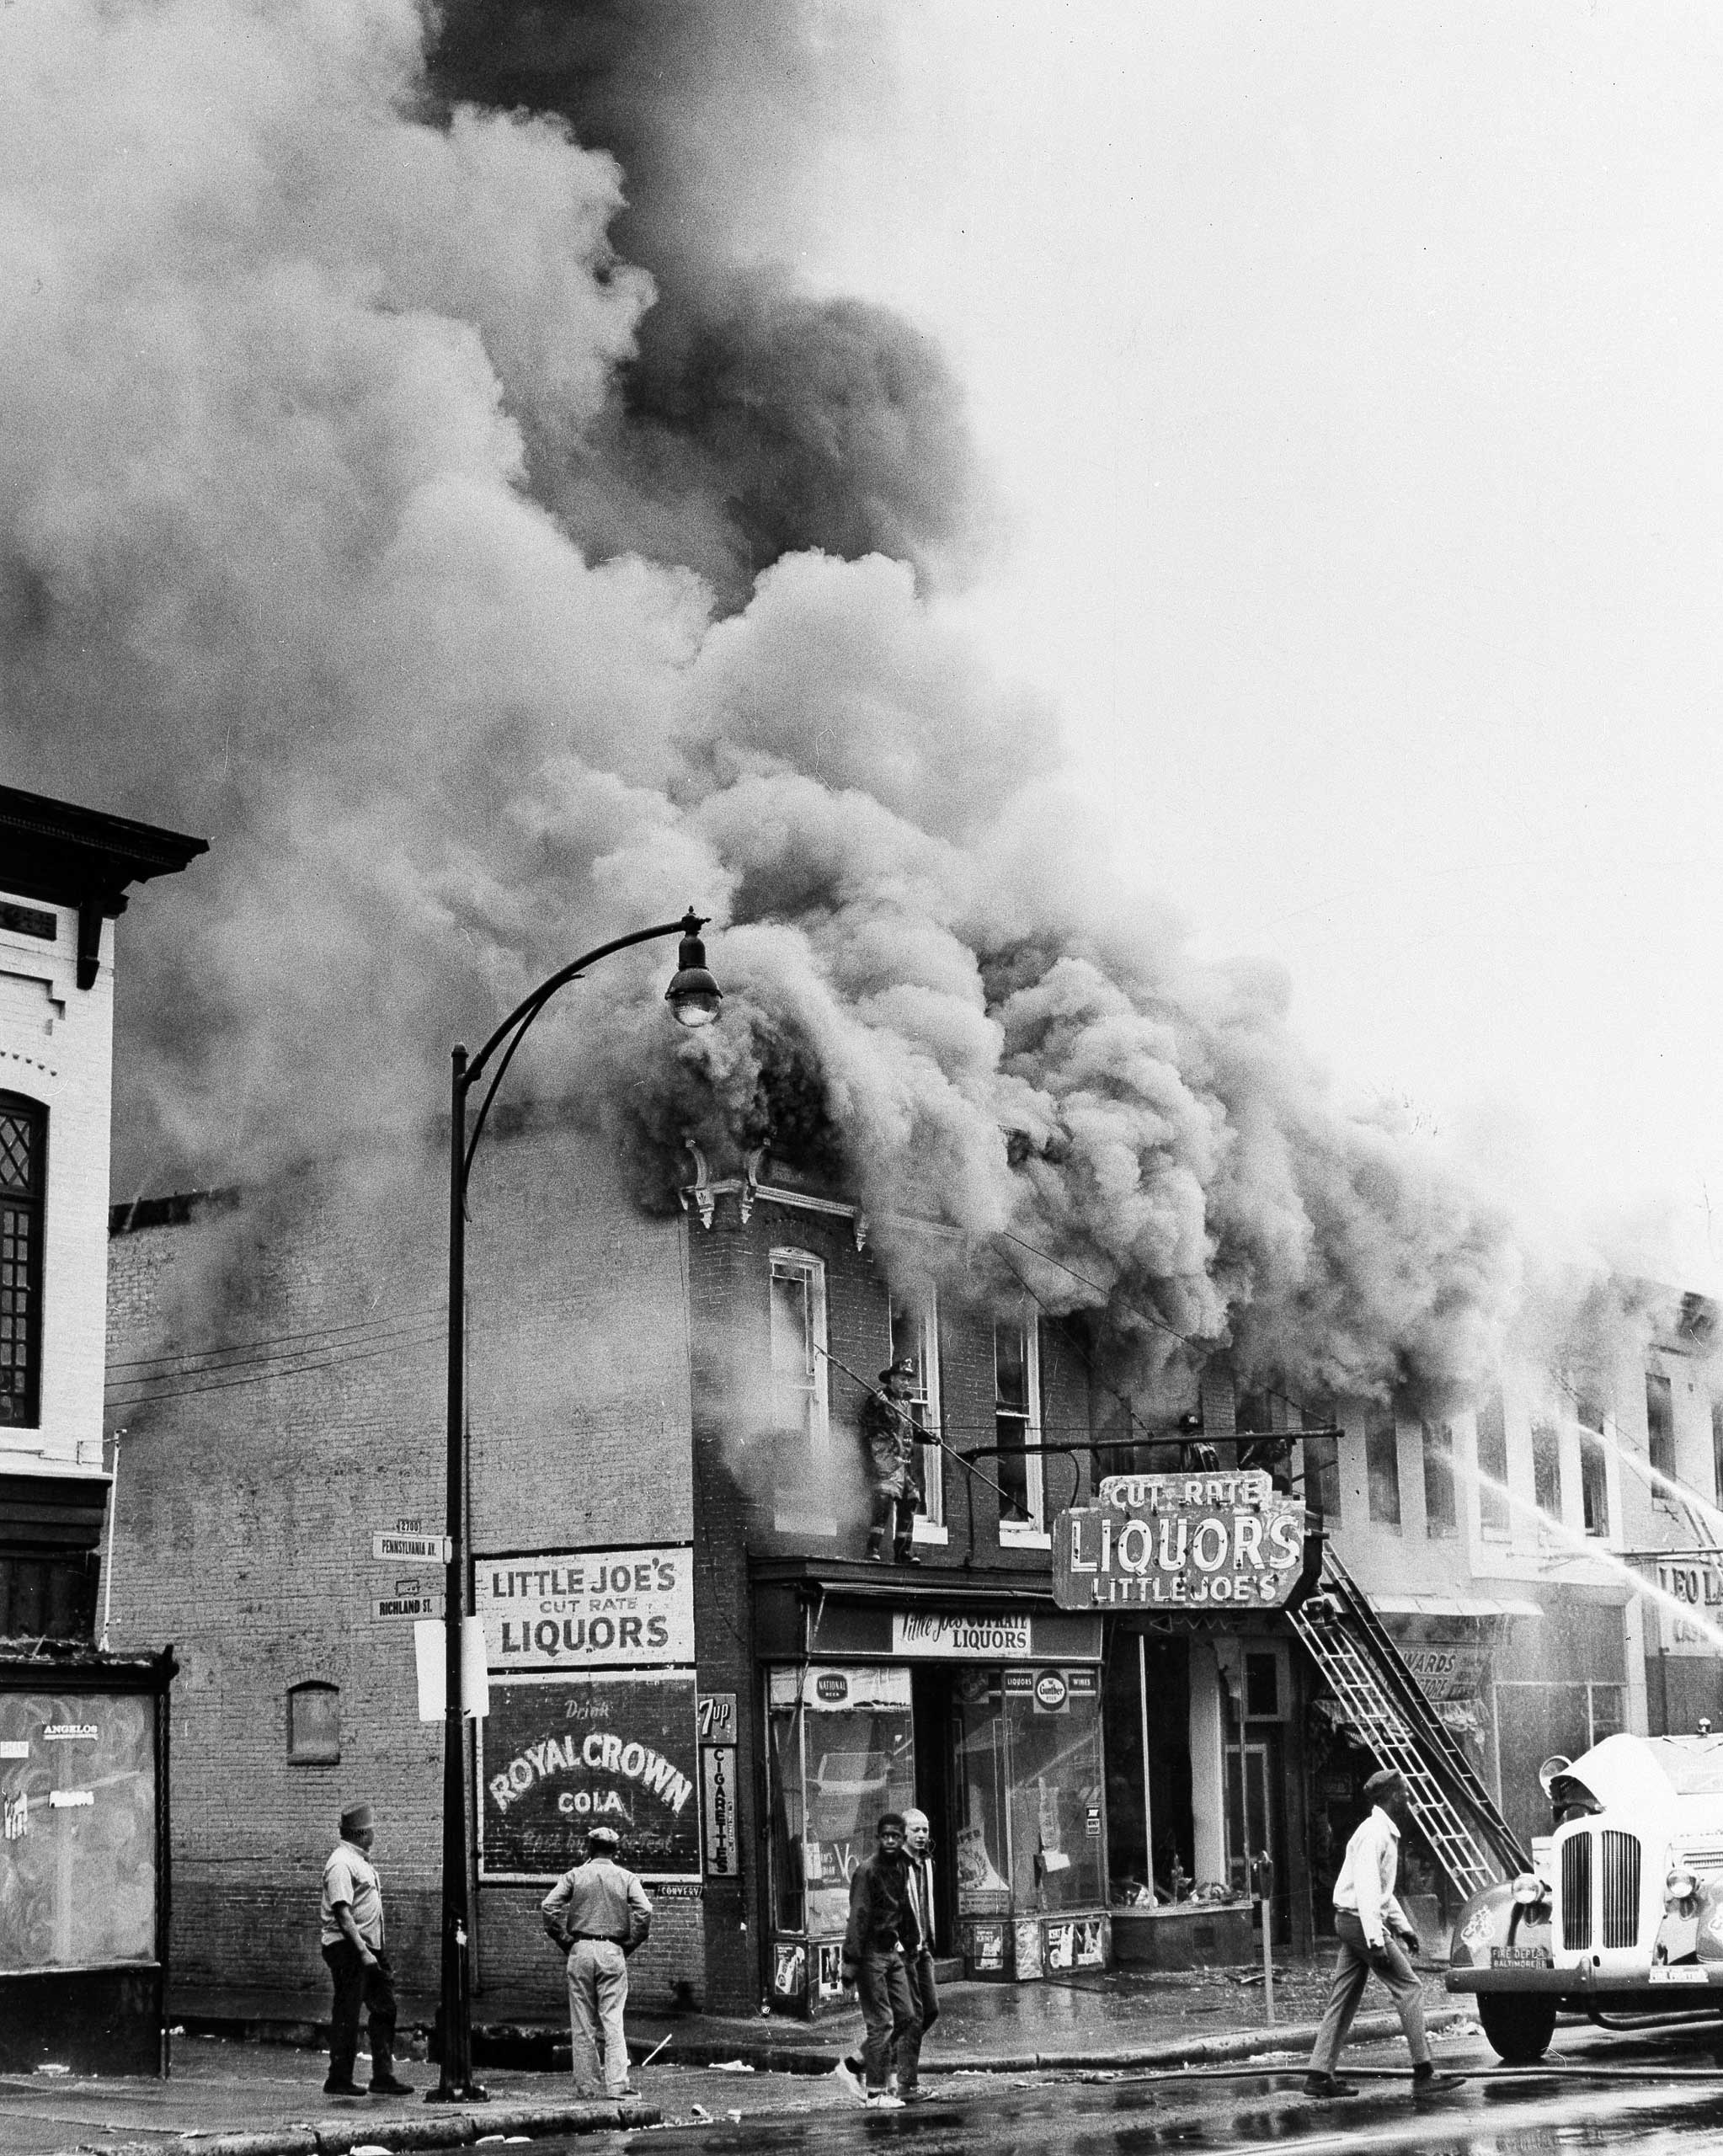 Smoke billows from a liquor store which was looted during the third day of violence, which saw over 400 fires, in Baltimore on April 8, 1968.